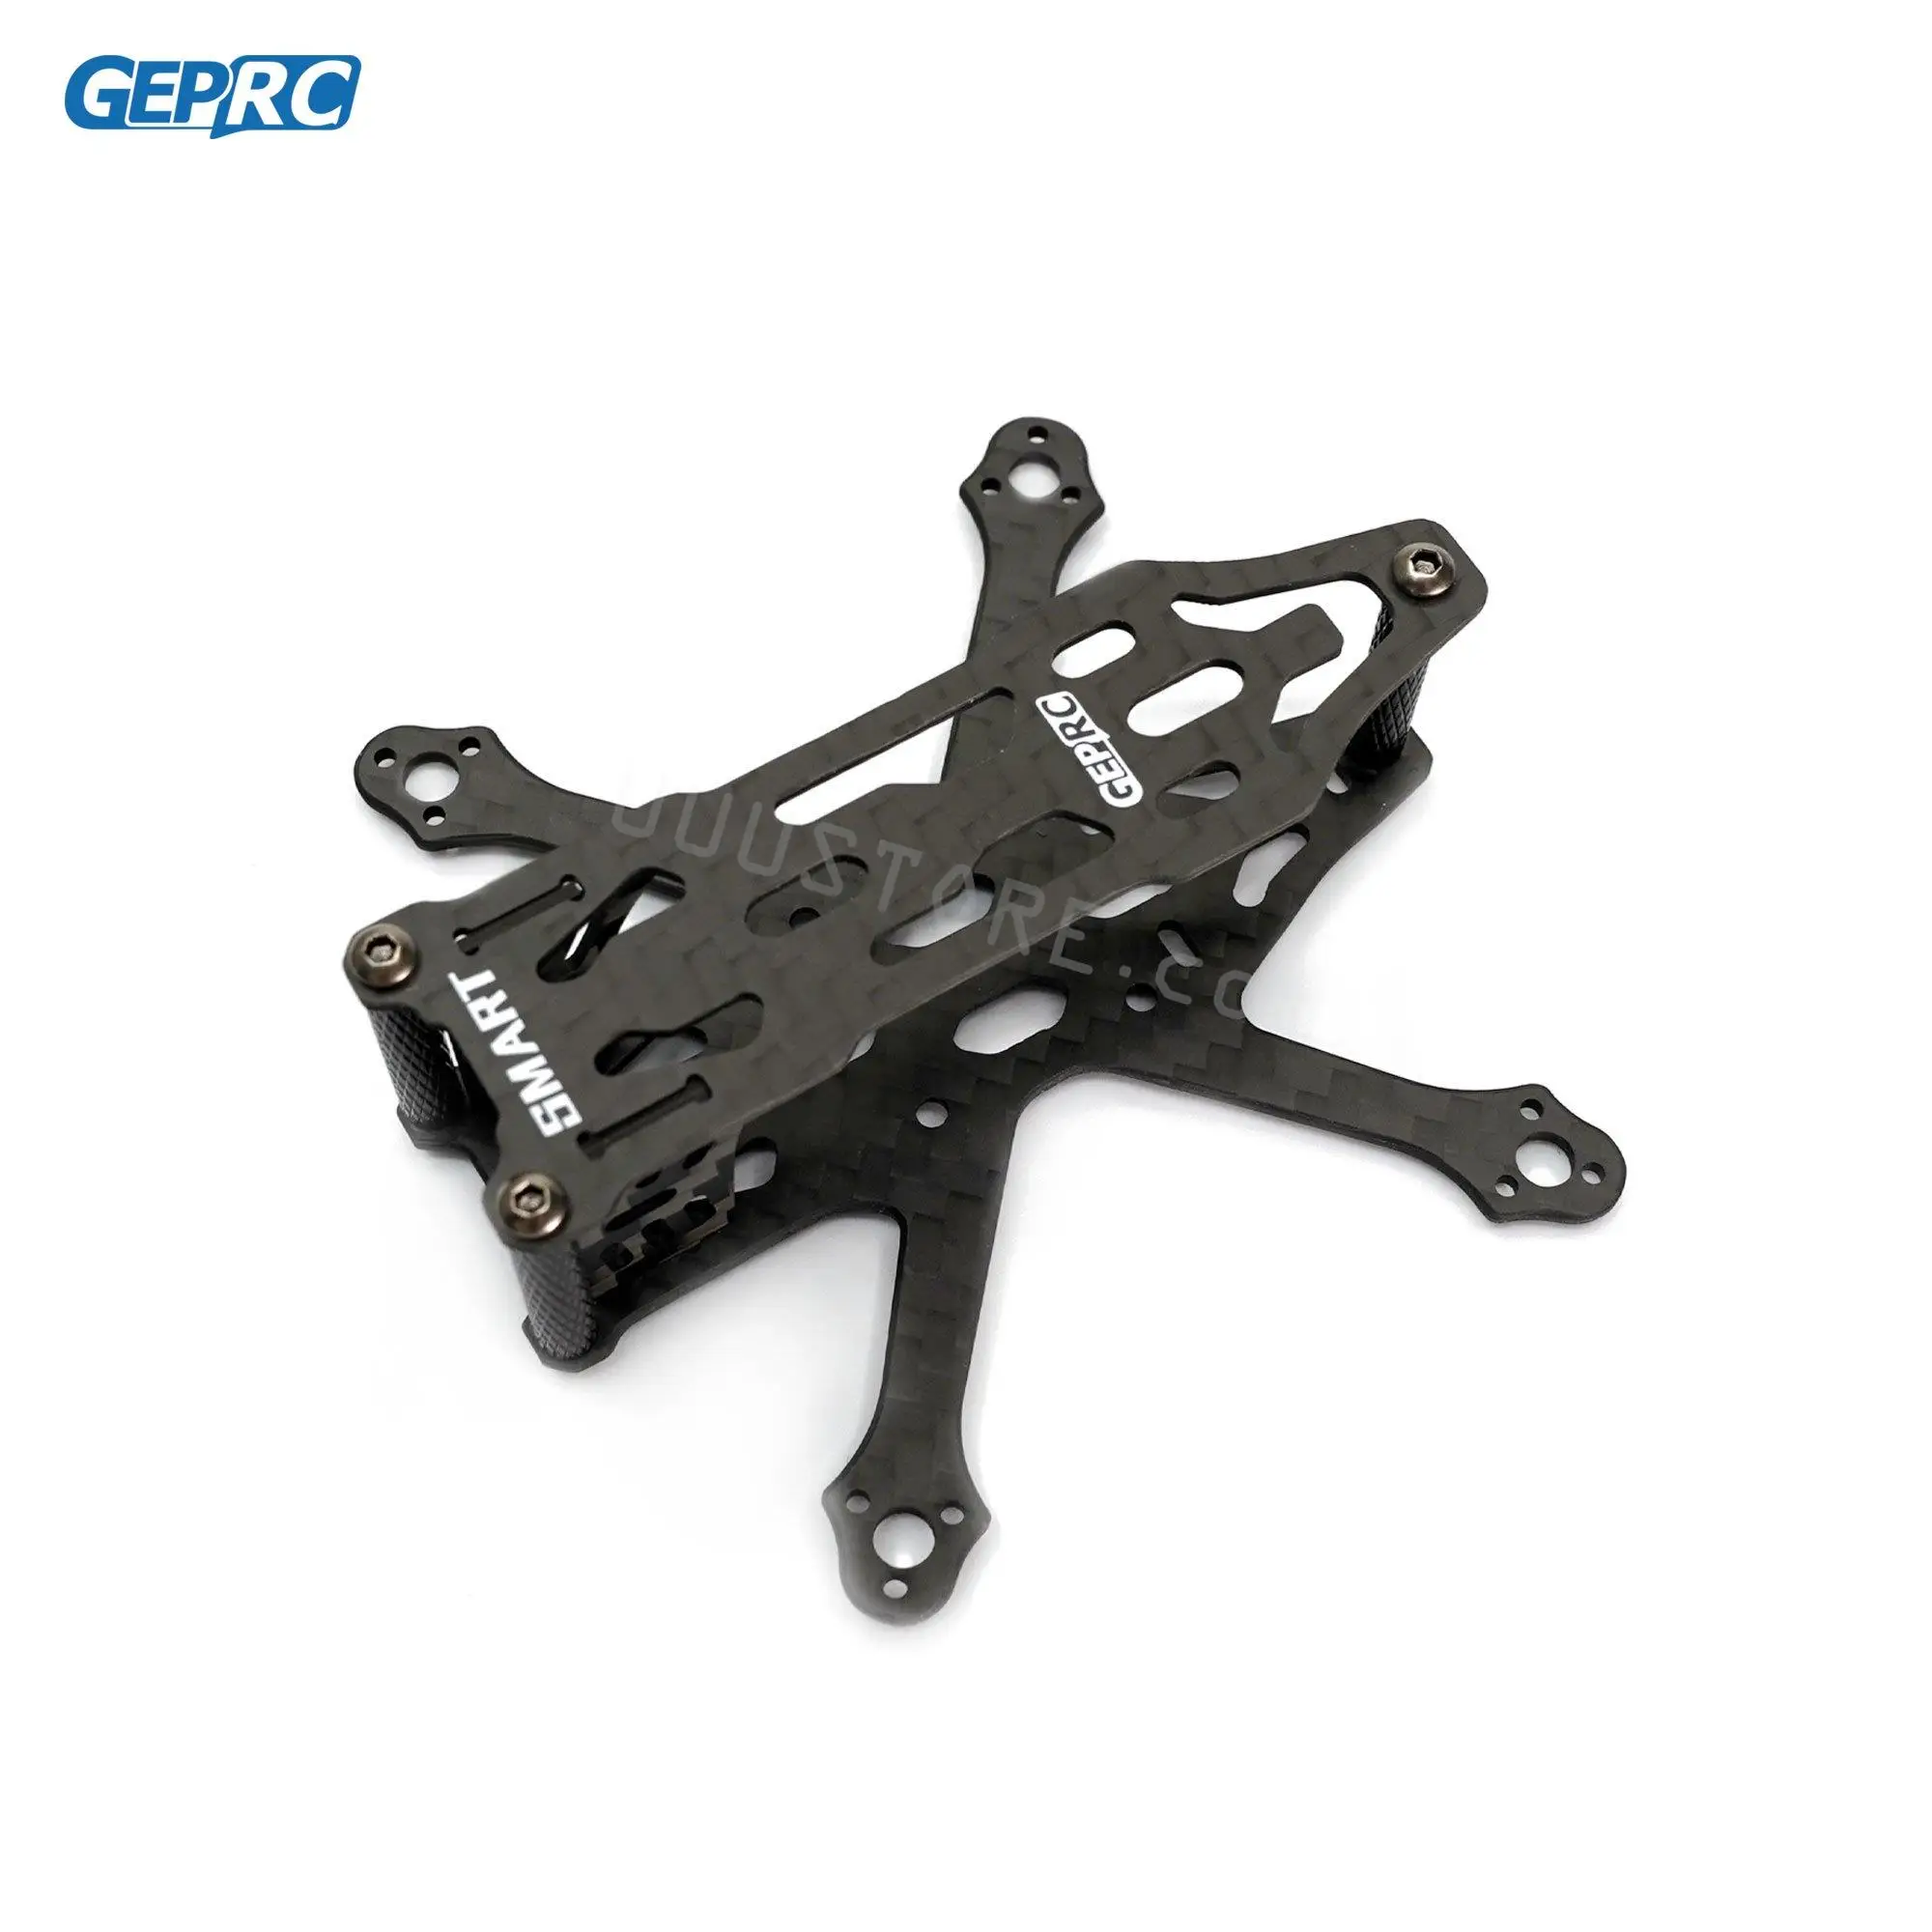 

GEPRC GEP-ST16 Frame Suitable For SMART16 Drone Carbon Fiber Frame For DIY RC FPV Quadcopter Freesryle Drone Accessories Parts